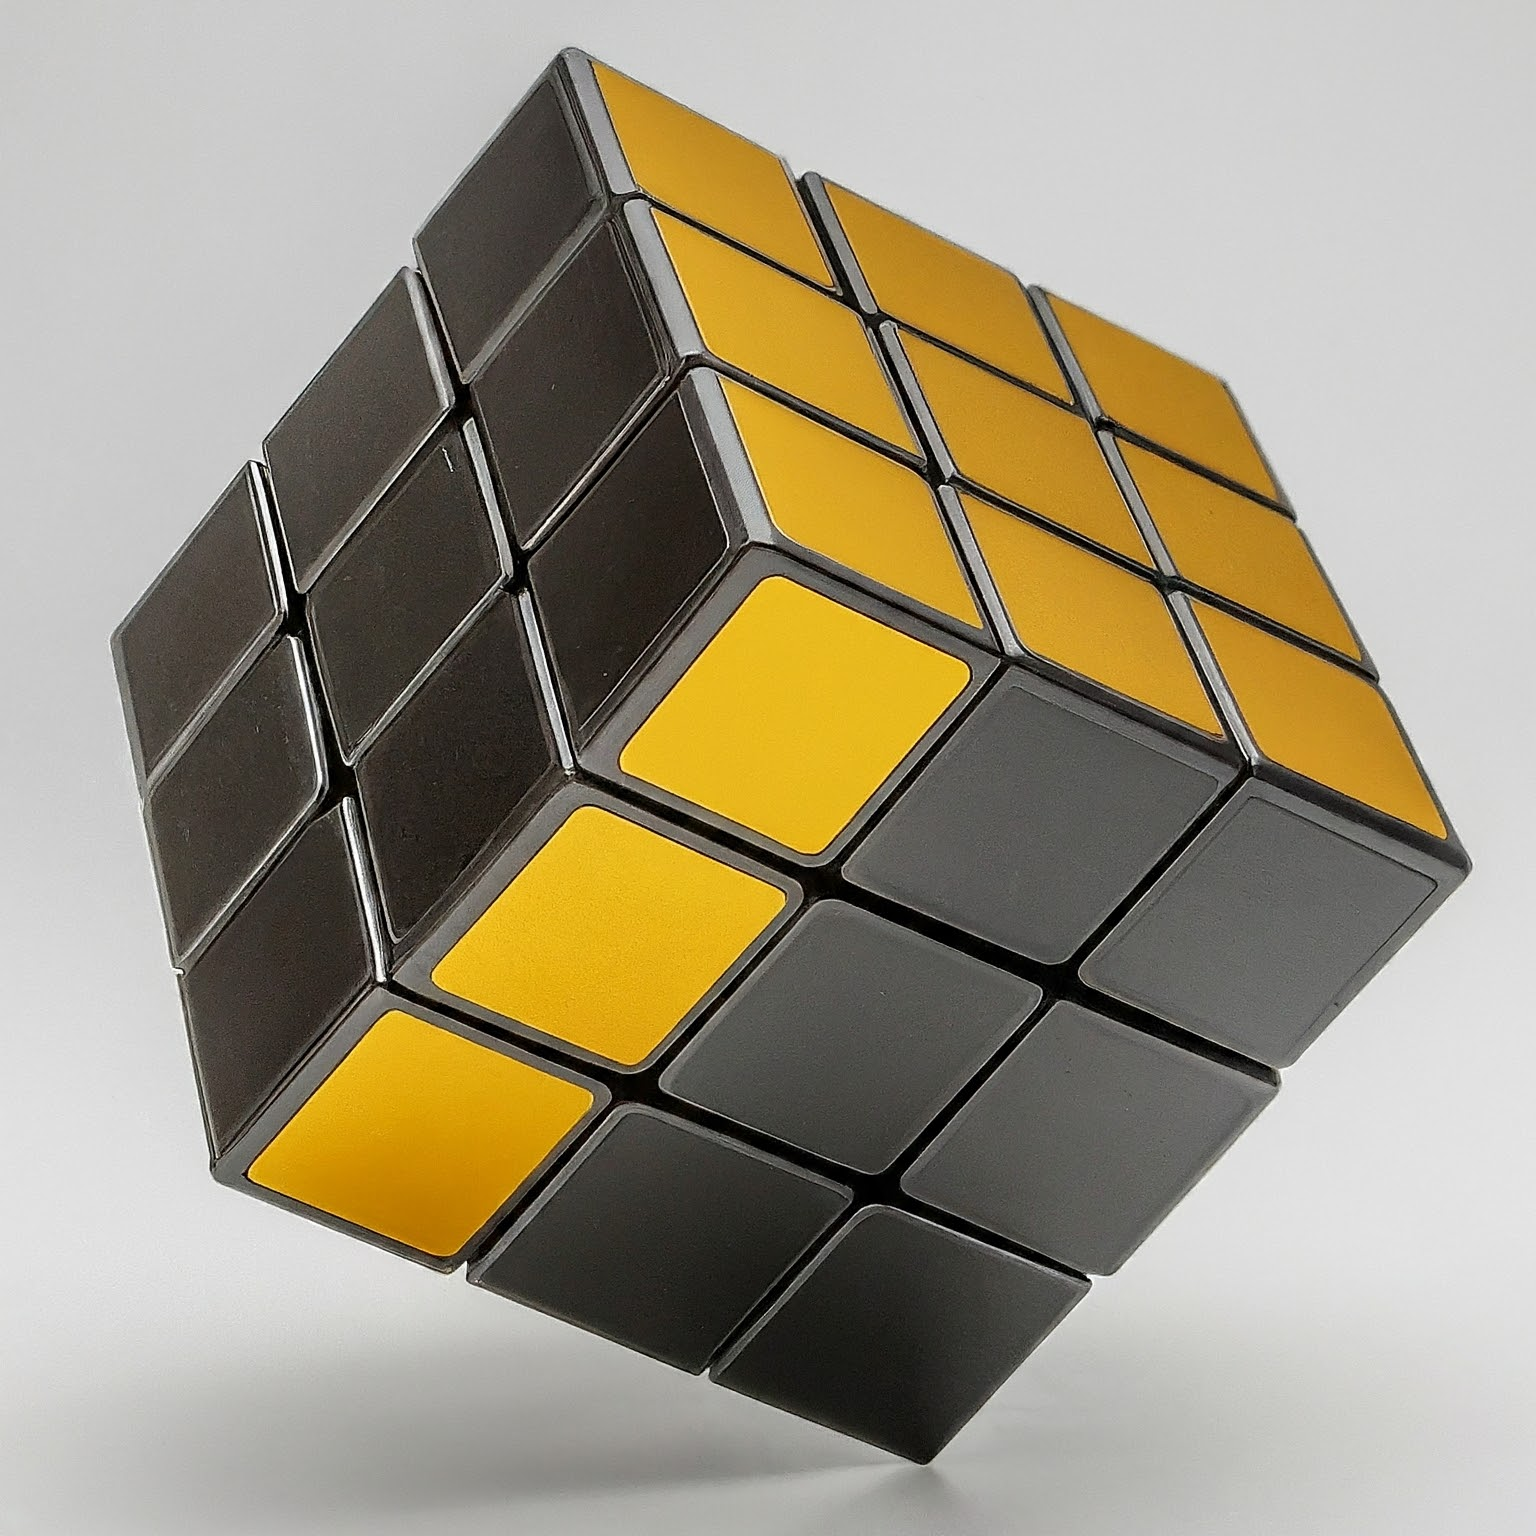 A scrambled Rubik's cube with bright and dark squares, symbolizing an overfitting machine learning model. 